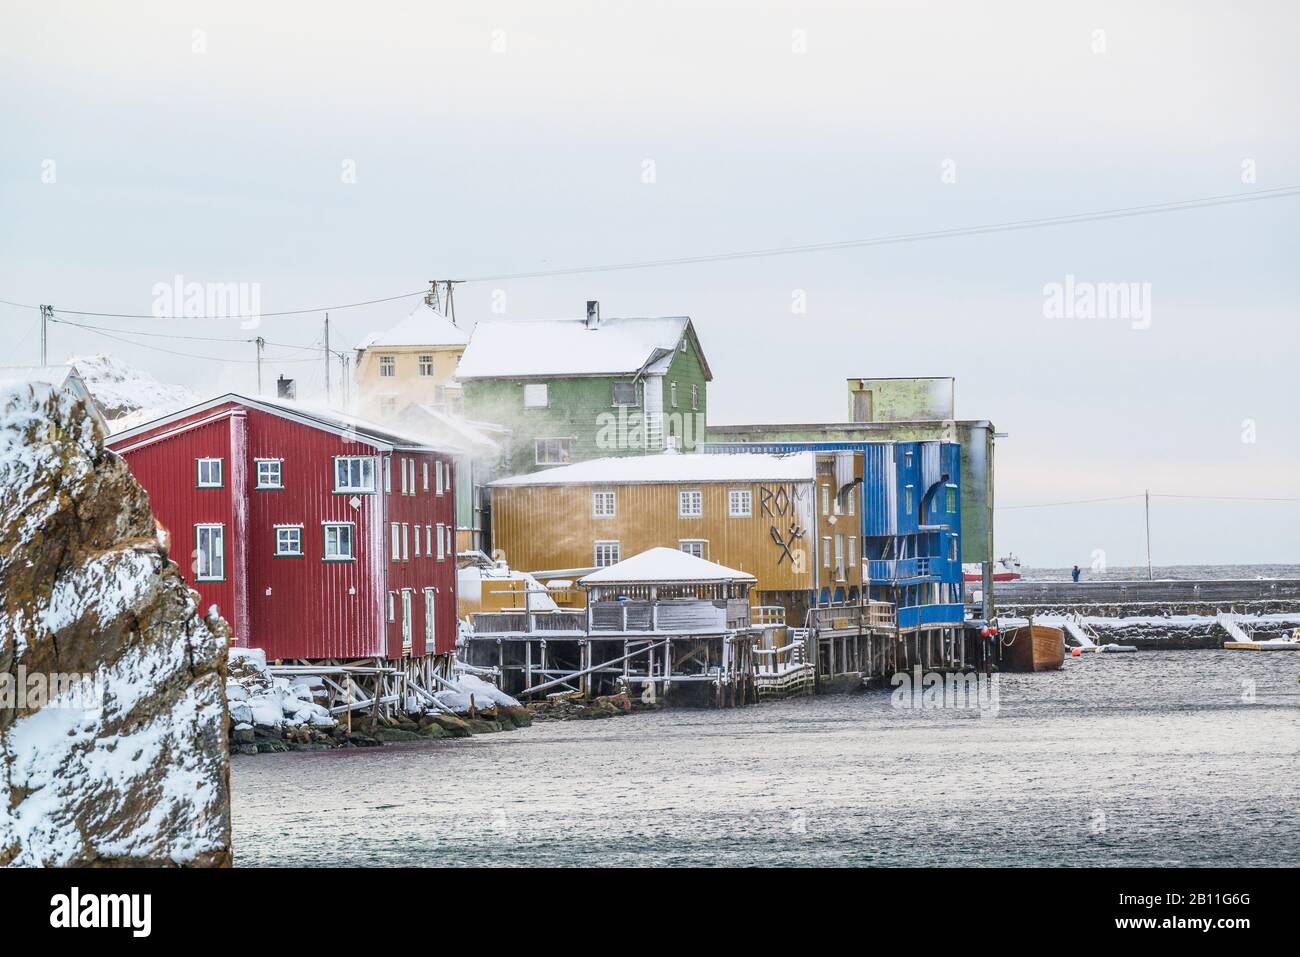 Nyksund is a fishing village on Vesterålen with around 15 inhabitants. The village has been abandoned several times in the past when fishermen no longer saw an adequate livelihood. It has been revived for several years. Stock Photo